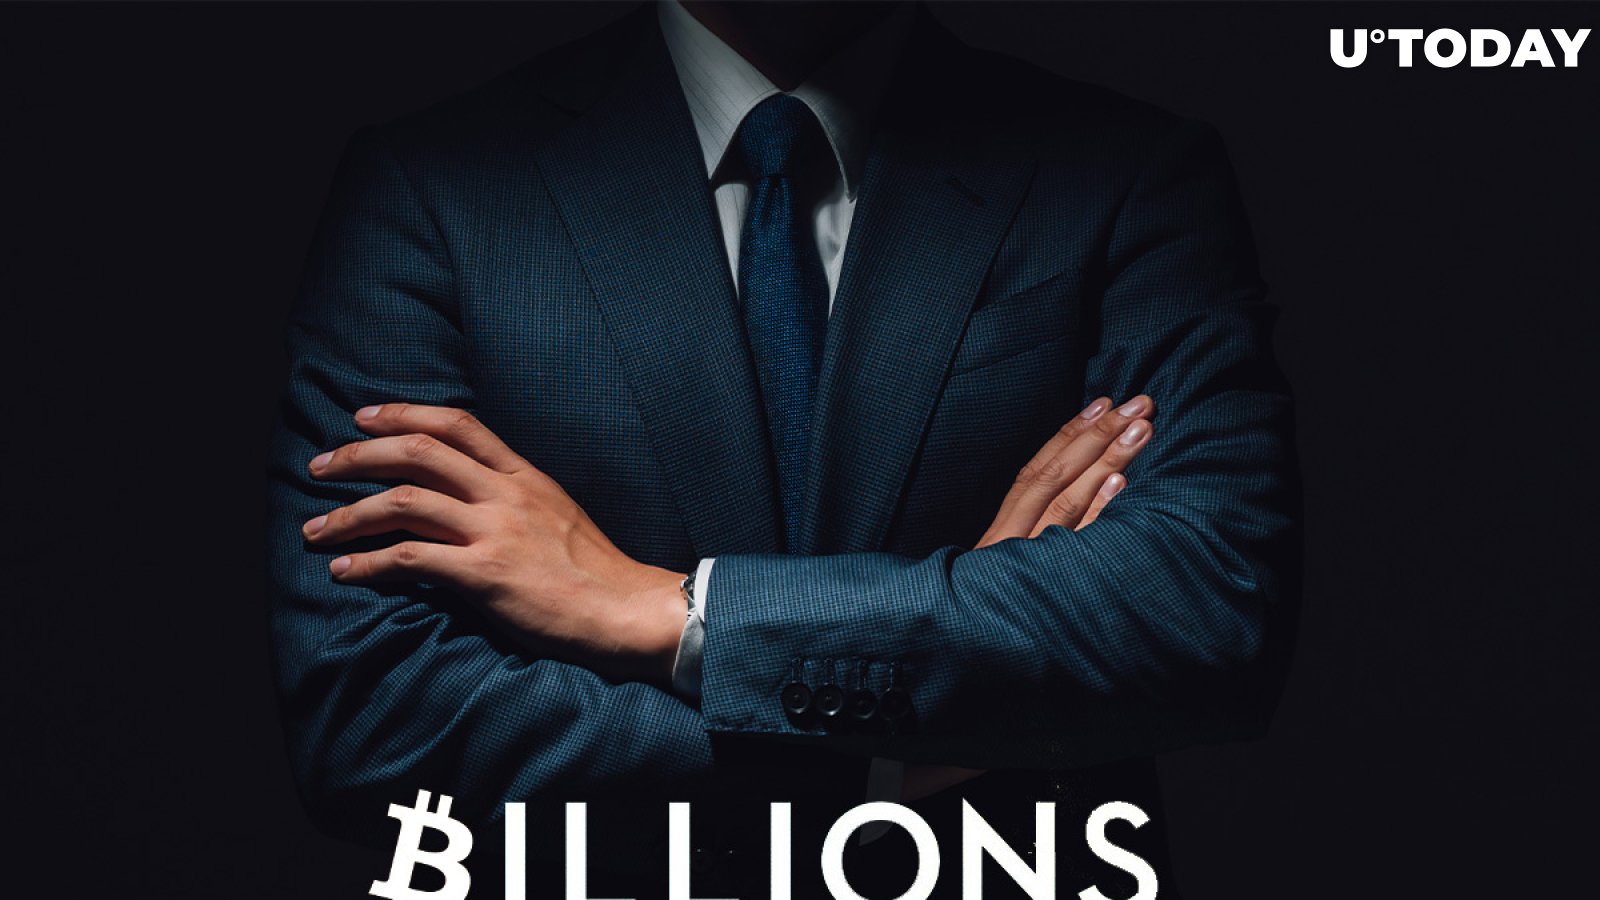 Bitcoin Makes Appearance on Another Episode of SHOWTIME's Hit Series 'Billions'